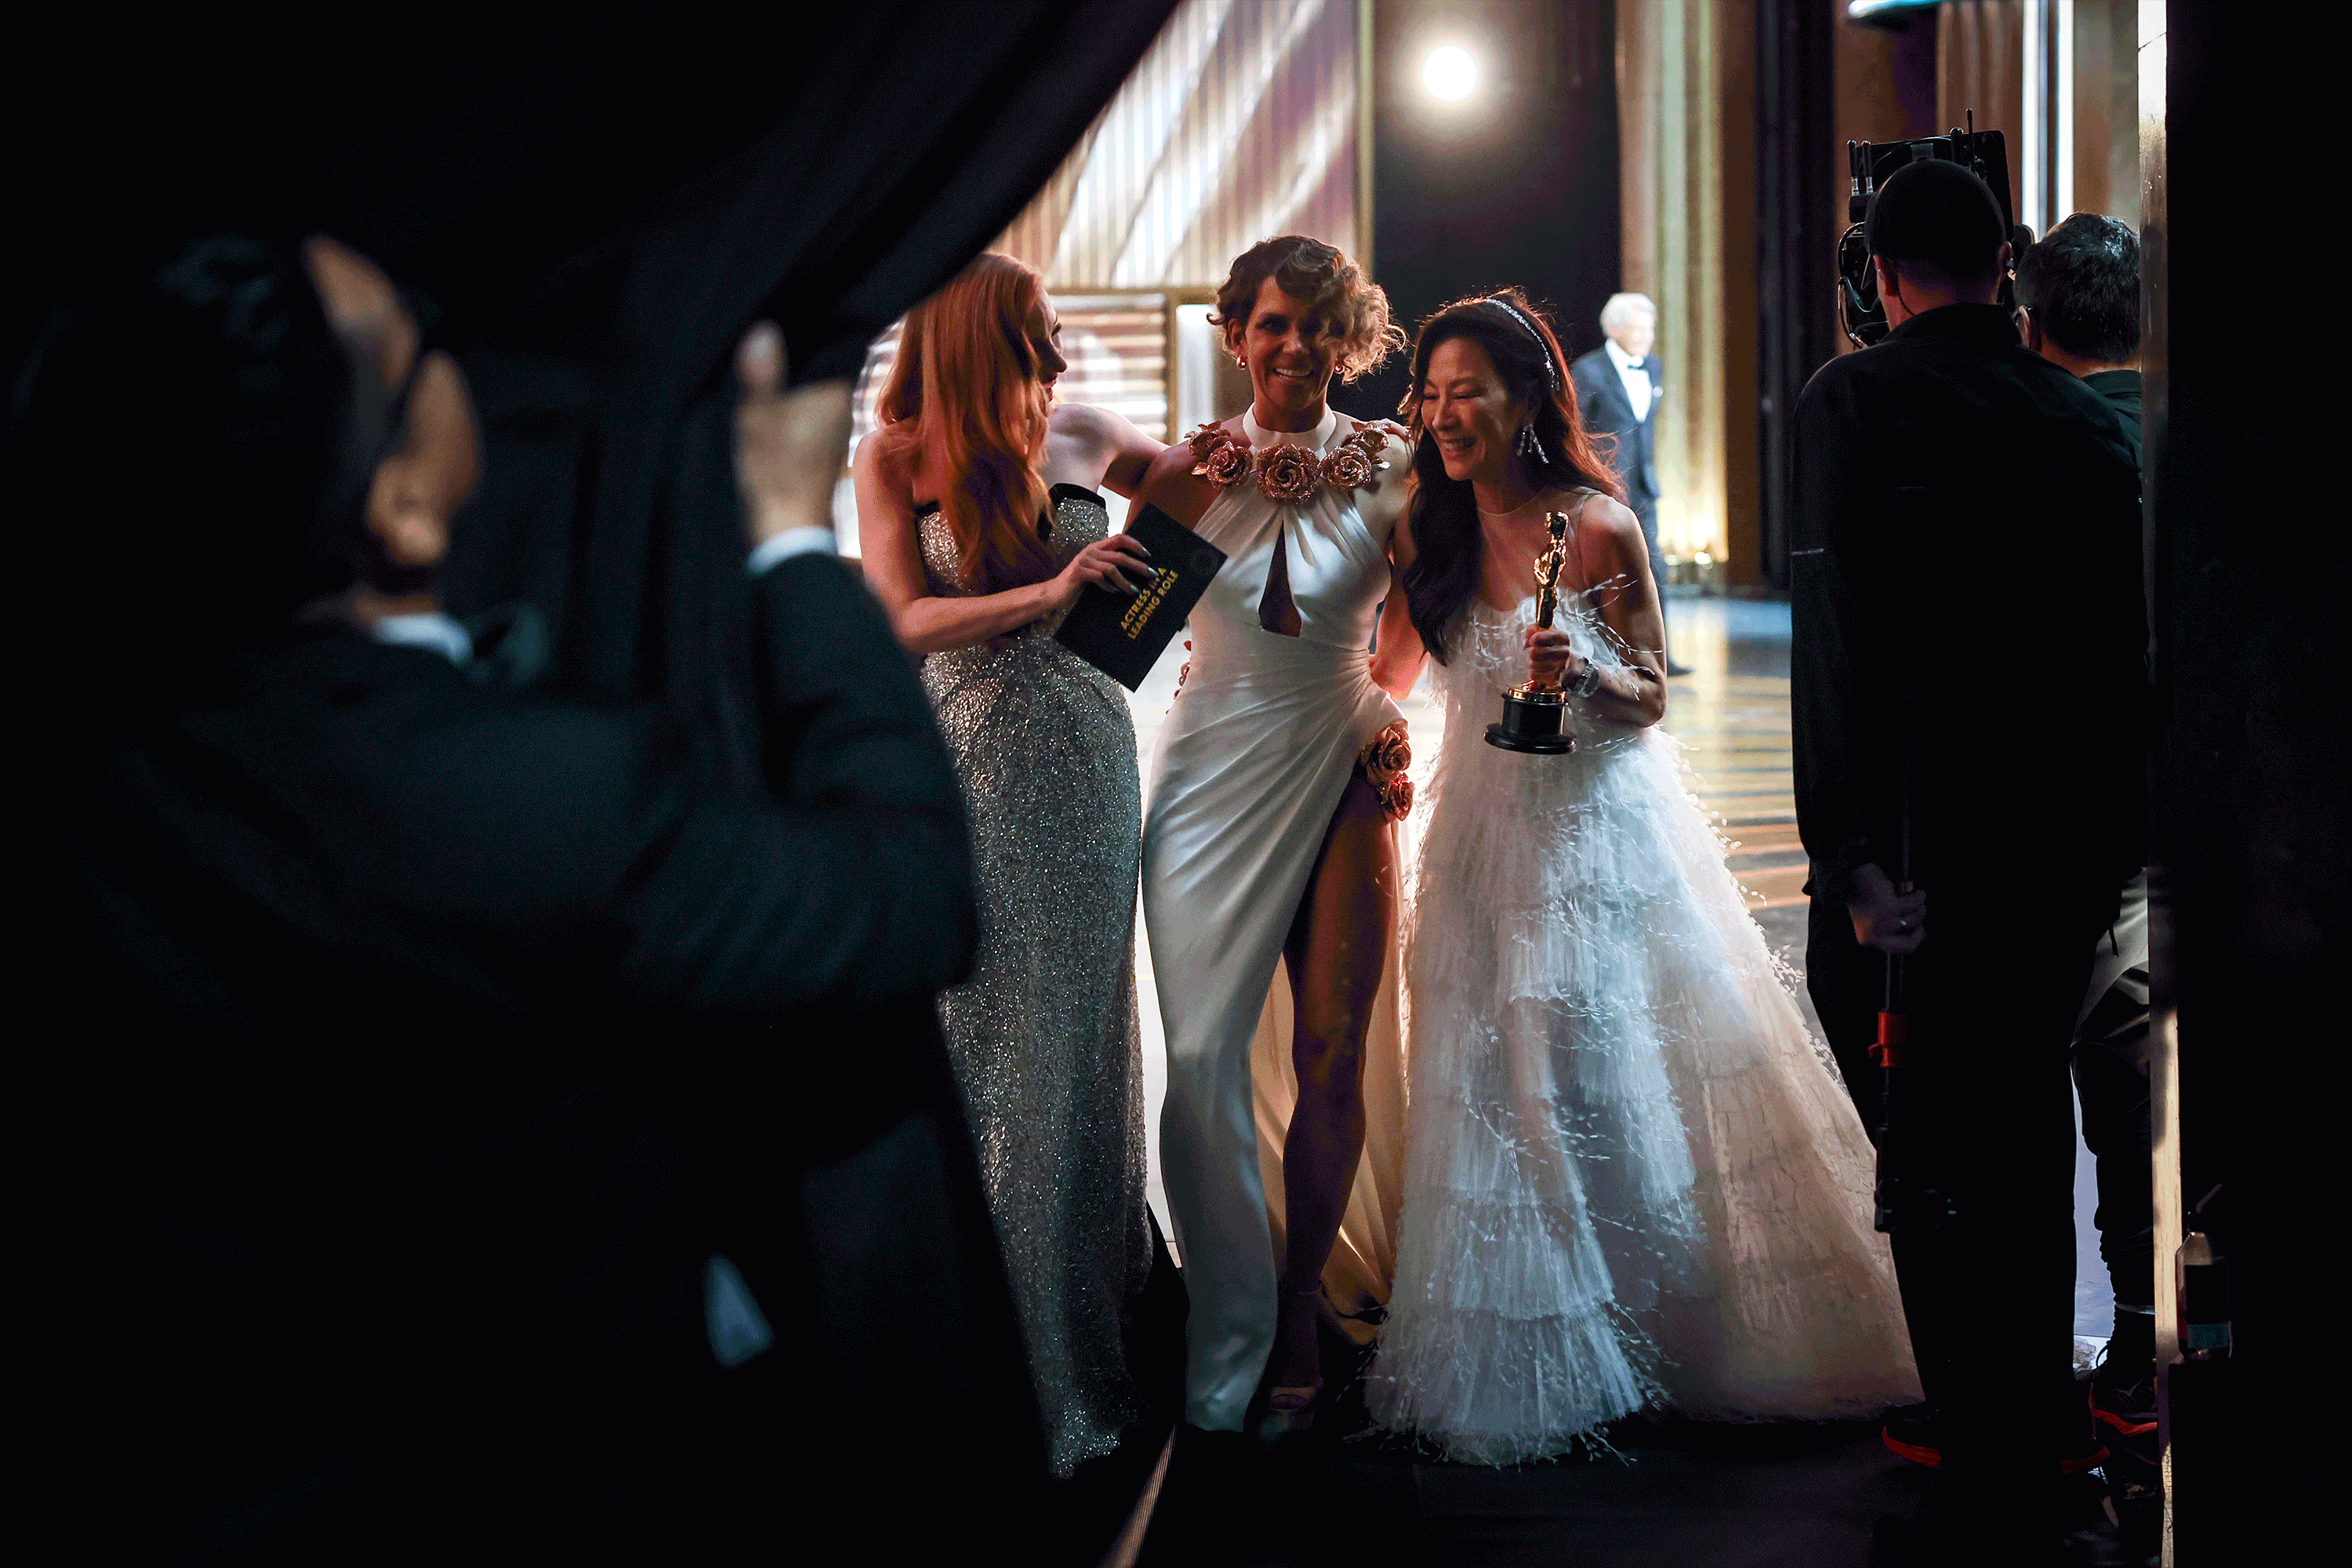 Photos of behind-the-scenes moments at the Oscars dissolve one into the next.